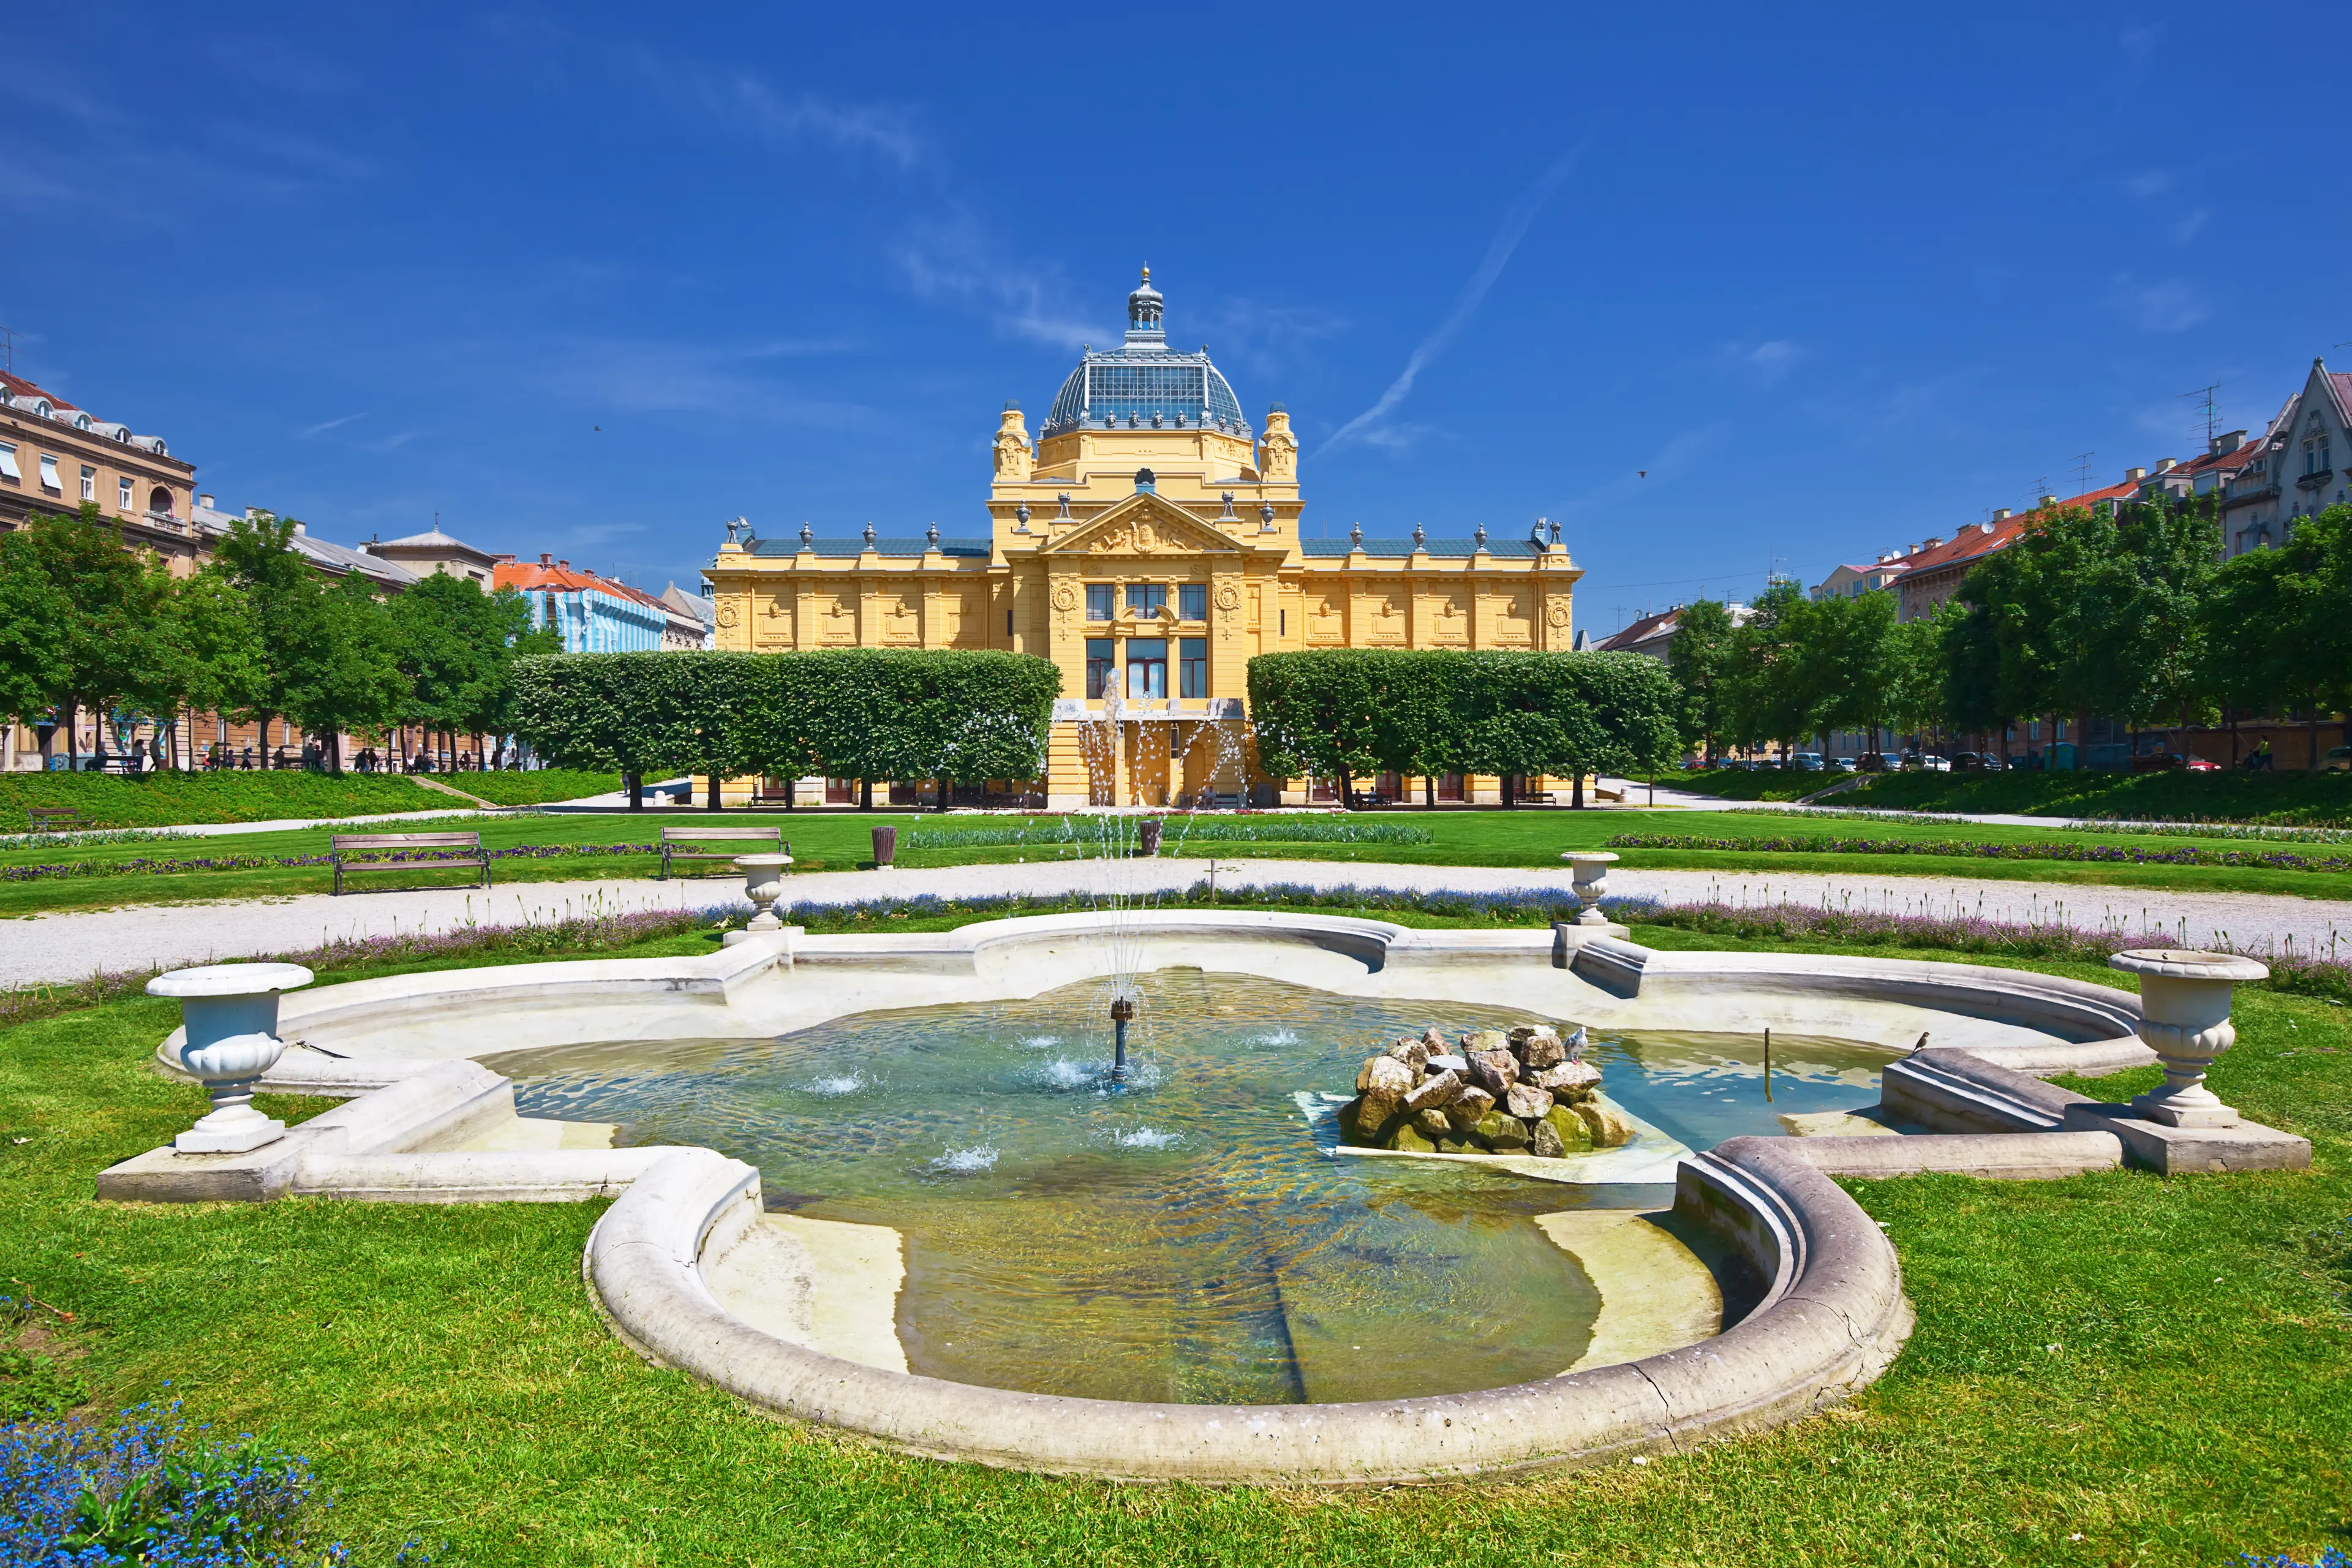 1-Day Family Adventure: Sightseeing & Shopping in Zagreb, Croatia